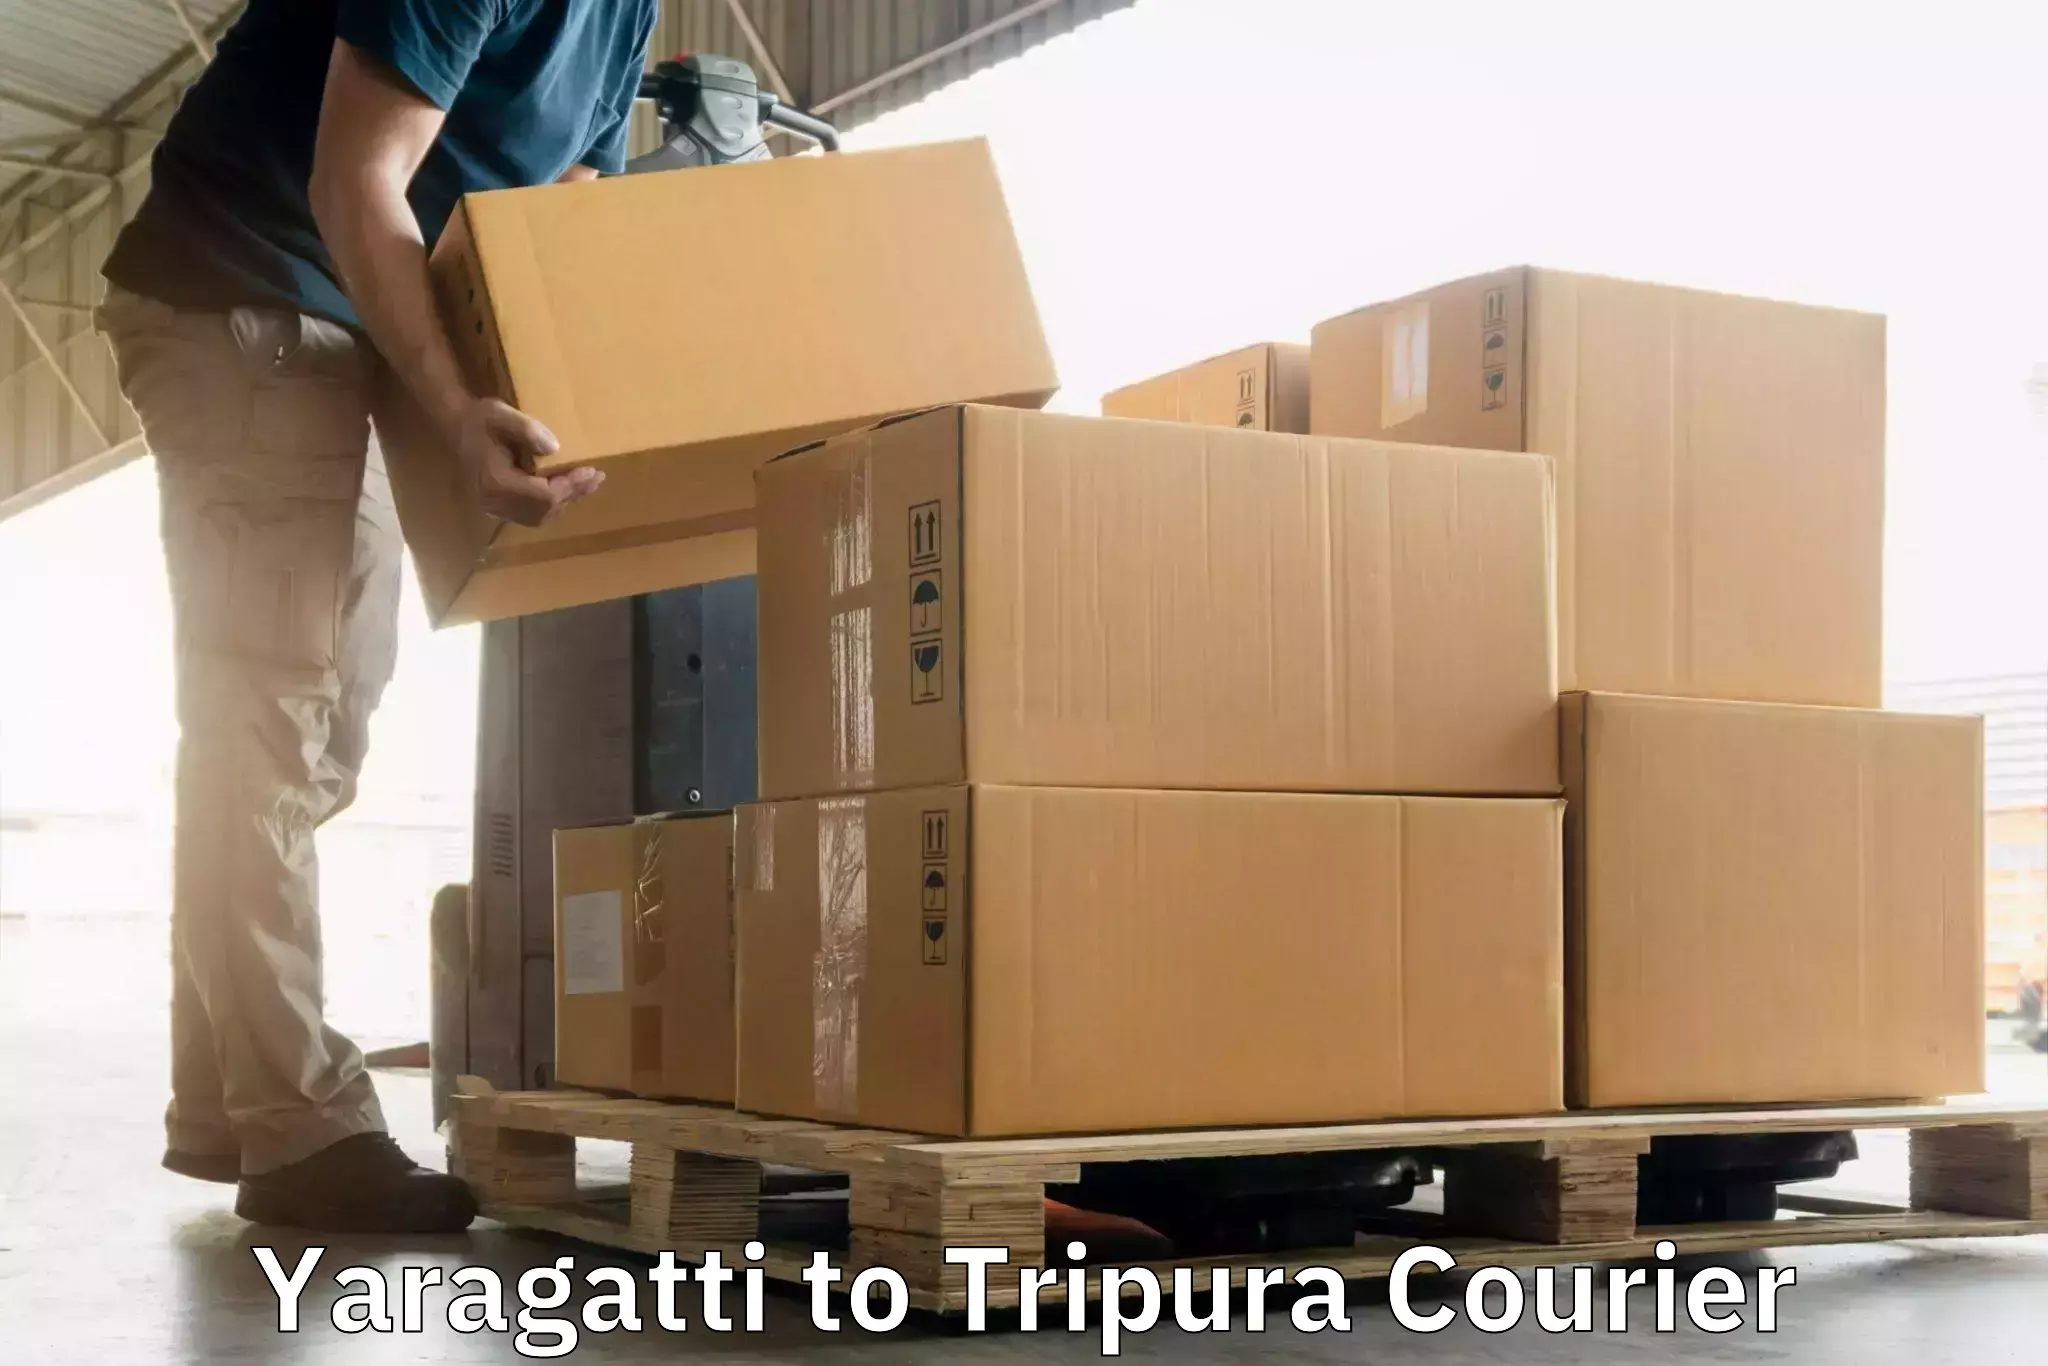 Package delivery network Yaragatti to Tripura